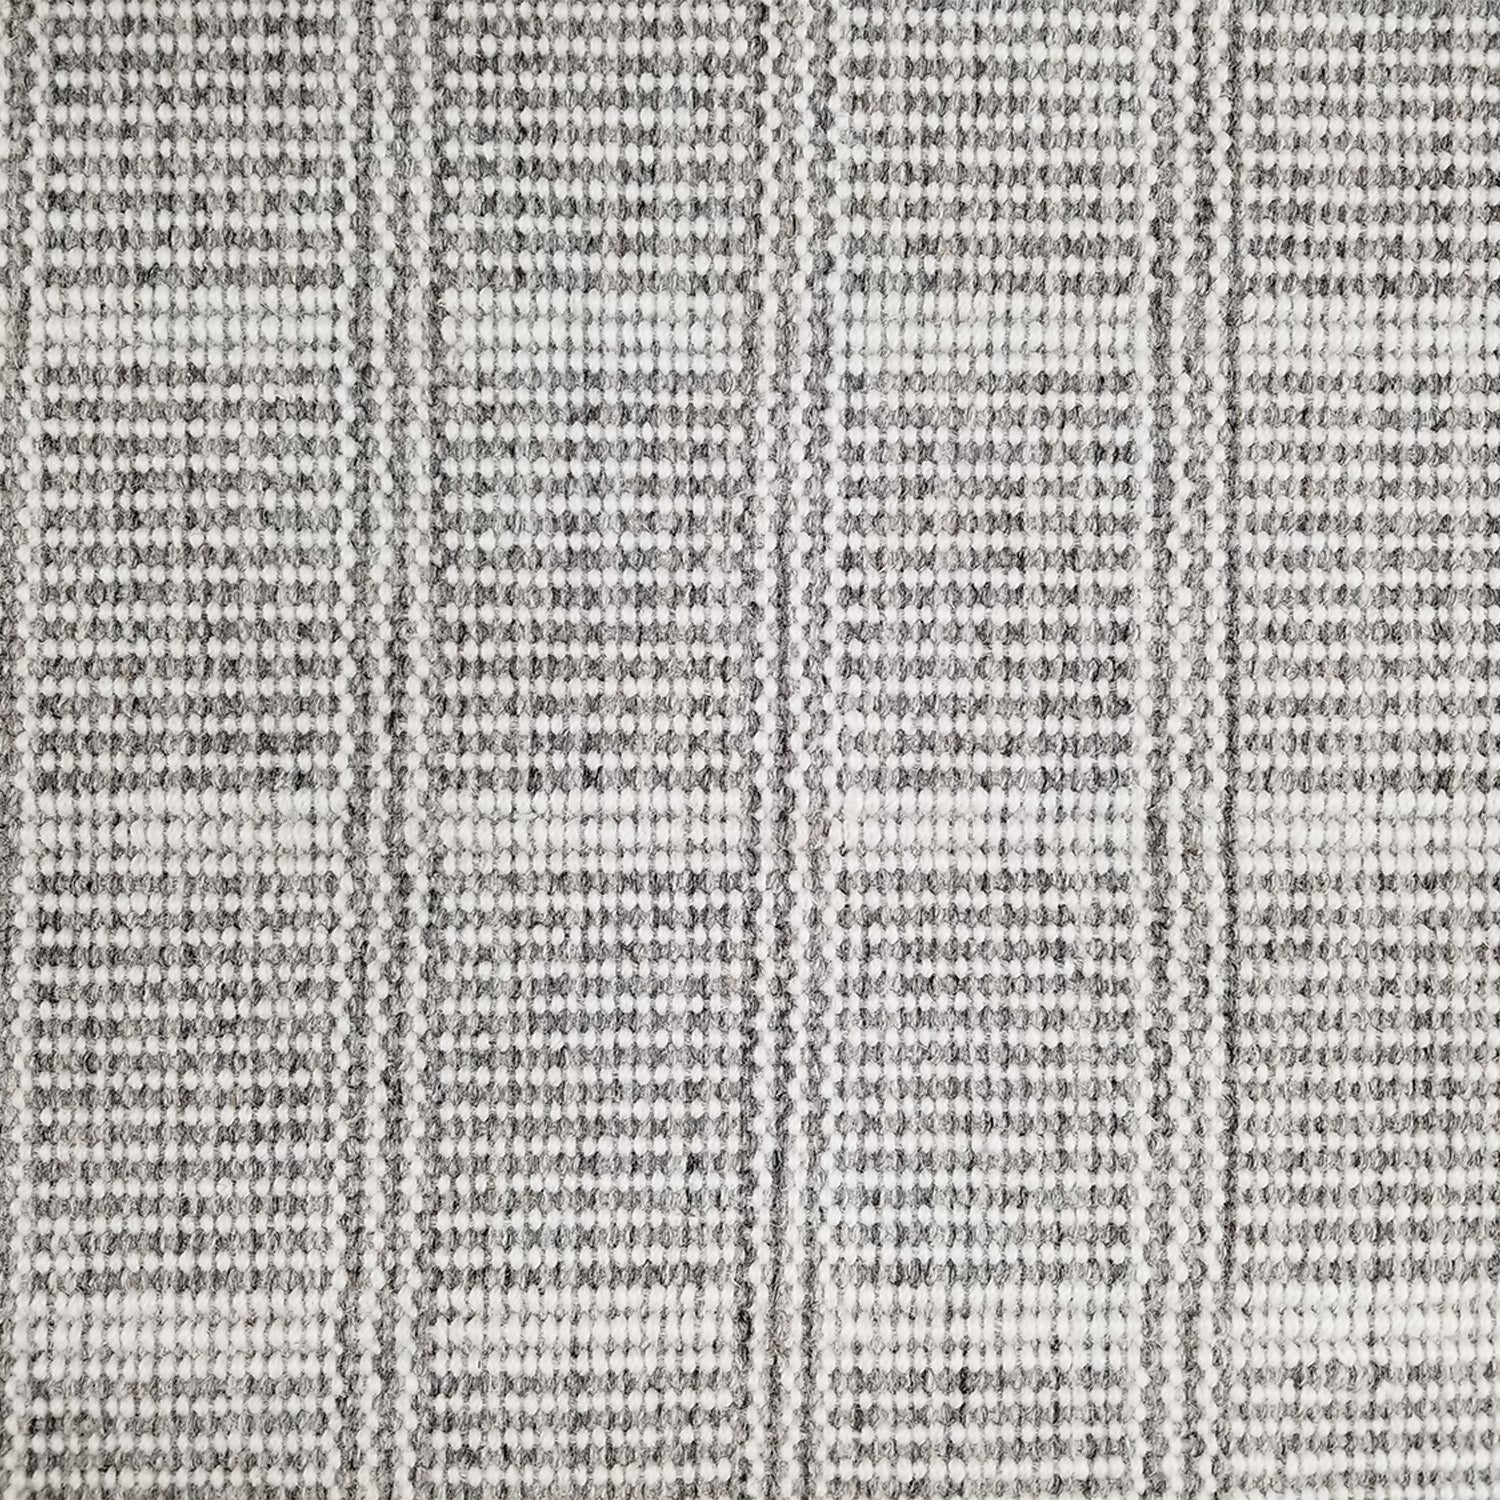 Wool broadloom carpet swatch in a plaid print in shades of gray and white.